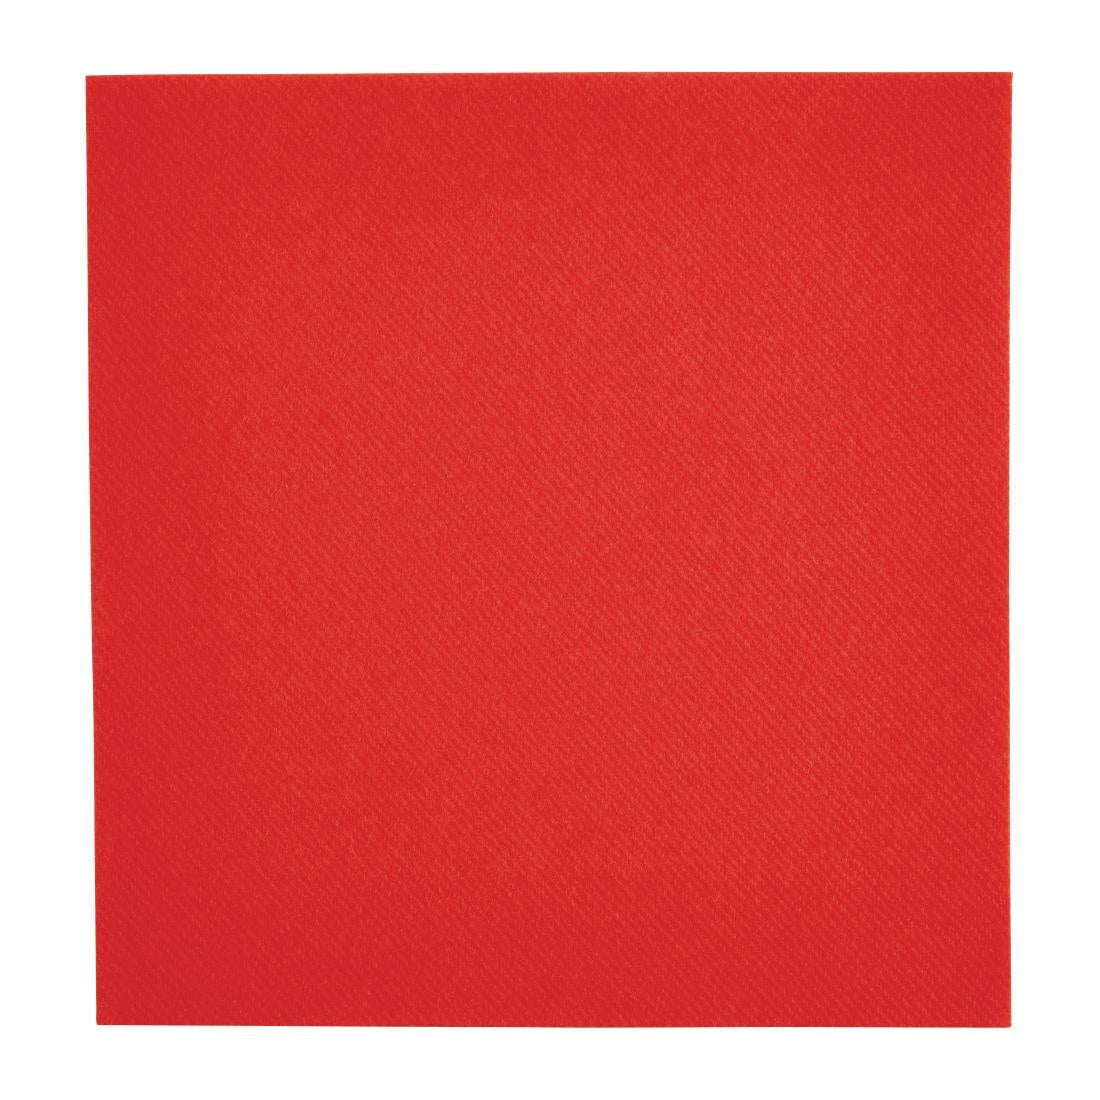 FE267 Fiesta Recyclable Premium Tablin Dinner Napkin Red 40x40cm Airlaid 1/4 Fold (Pack of 500) JD Catering Equipment Solutions Ltd